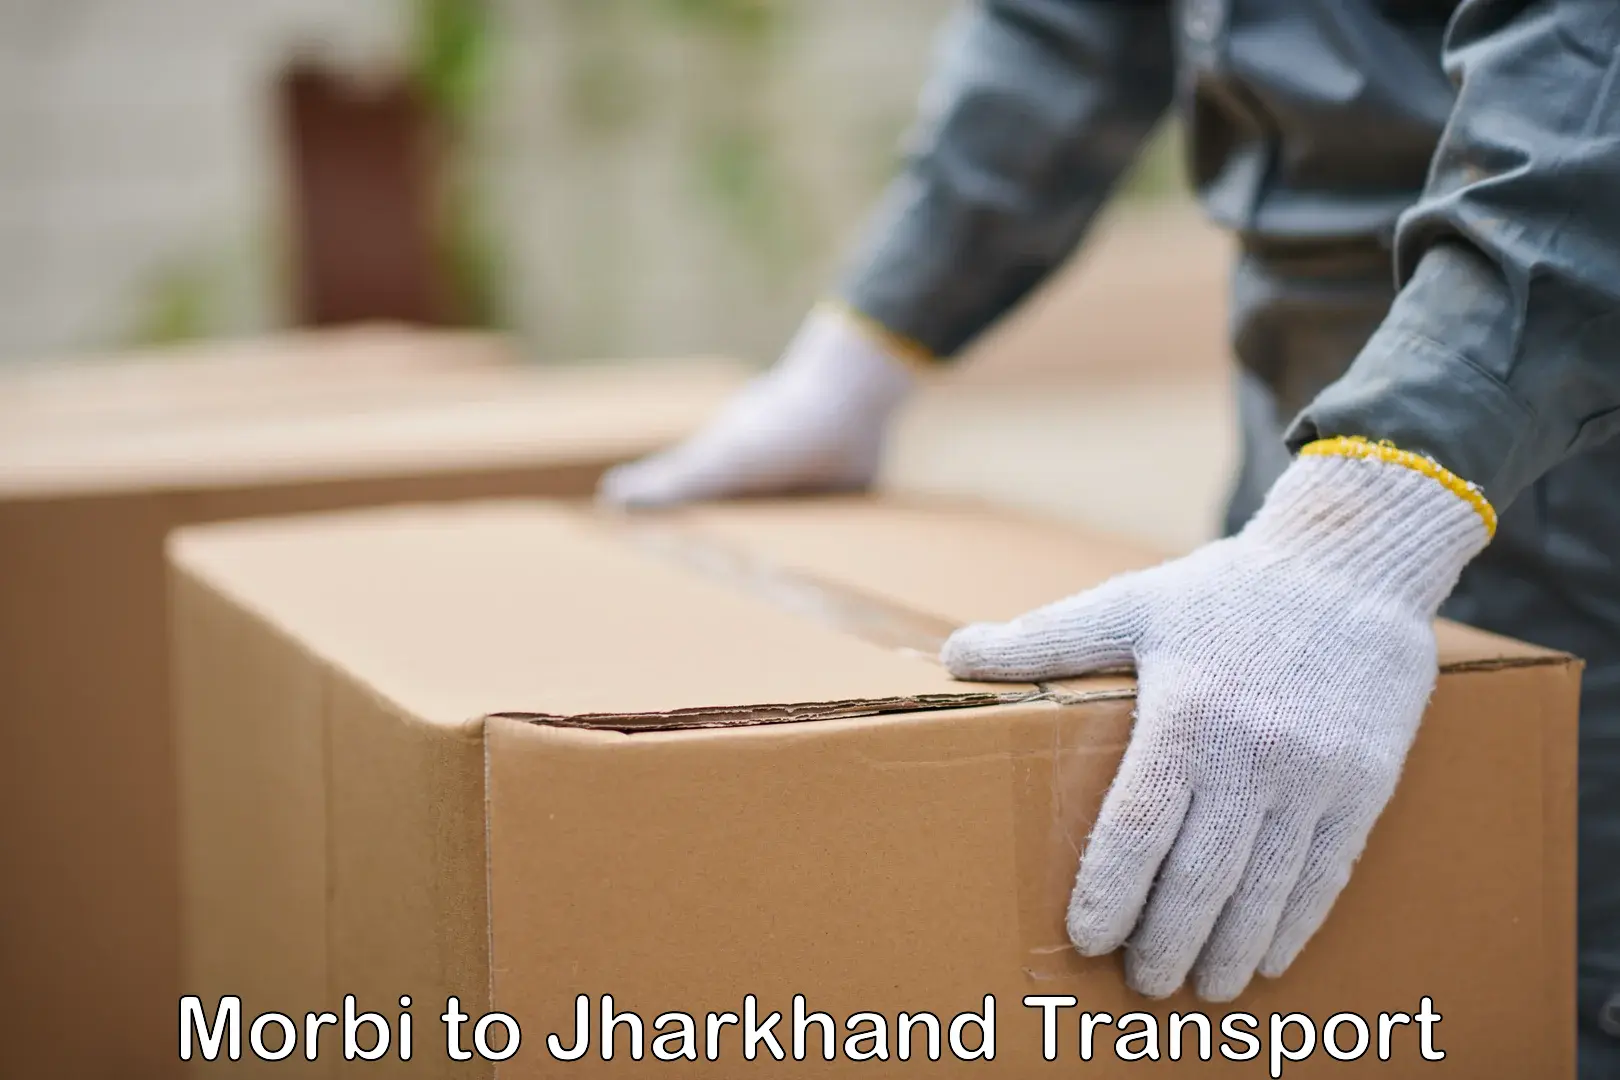 Daily transport service Morbi to Jharkhand